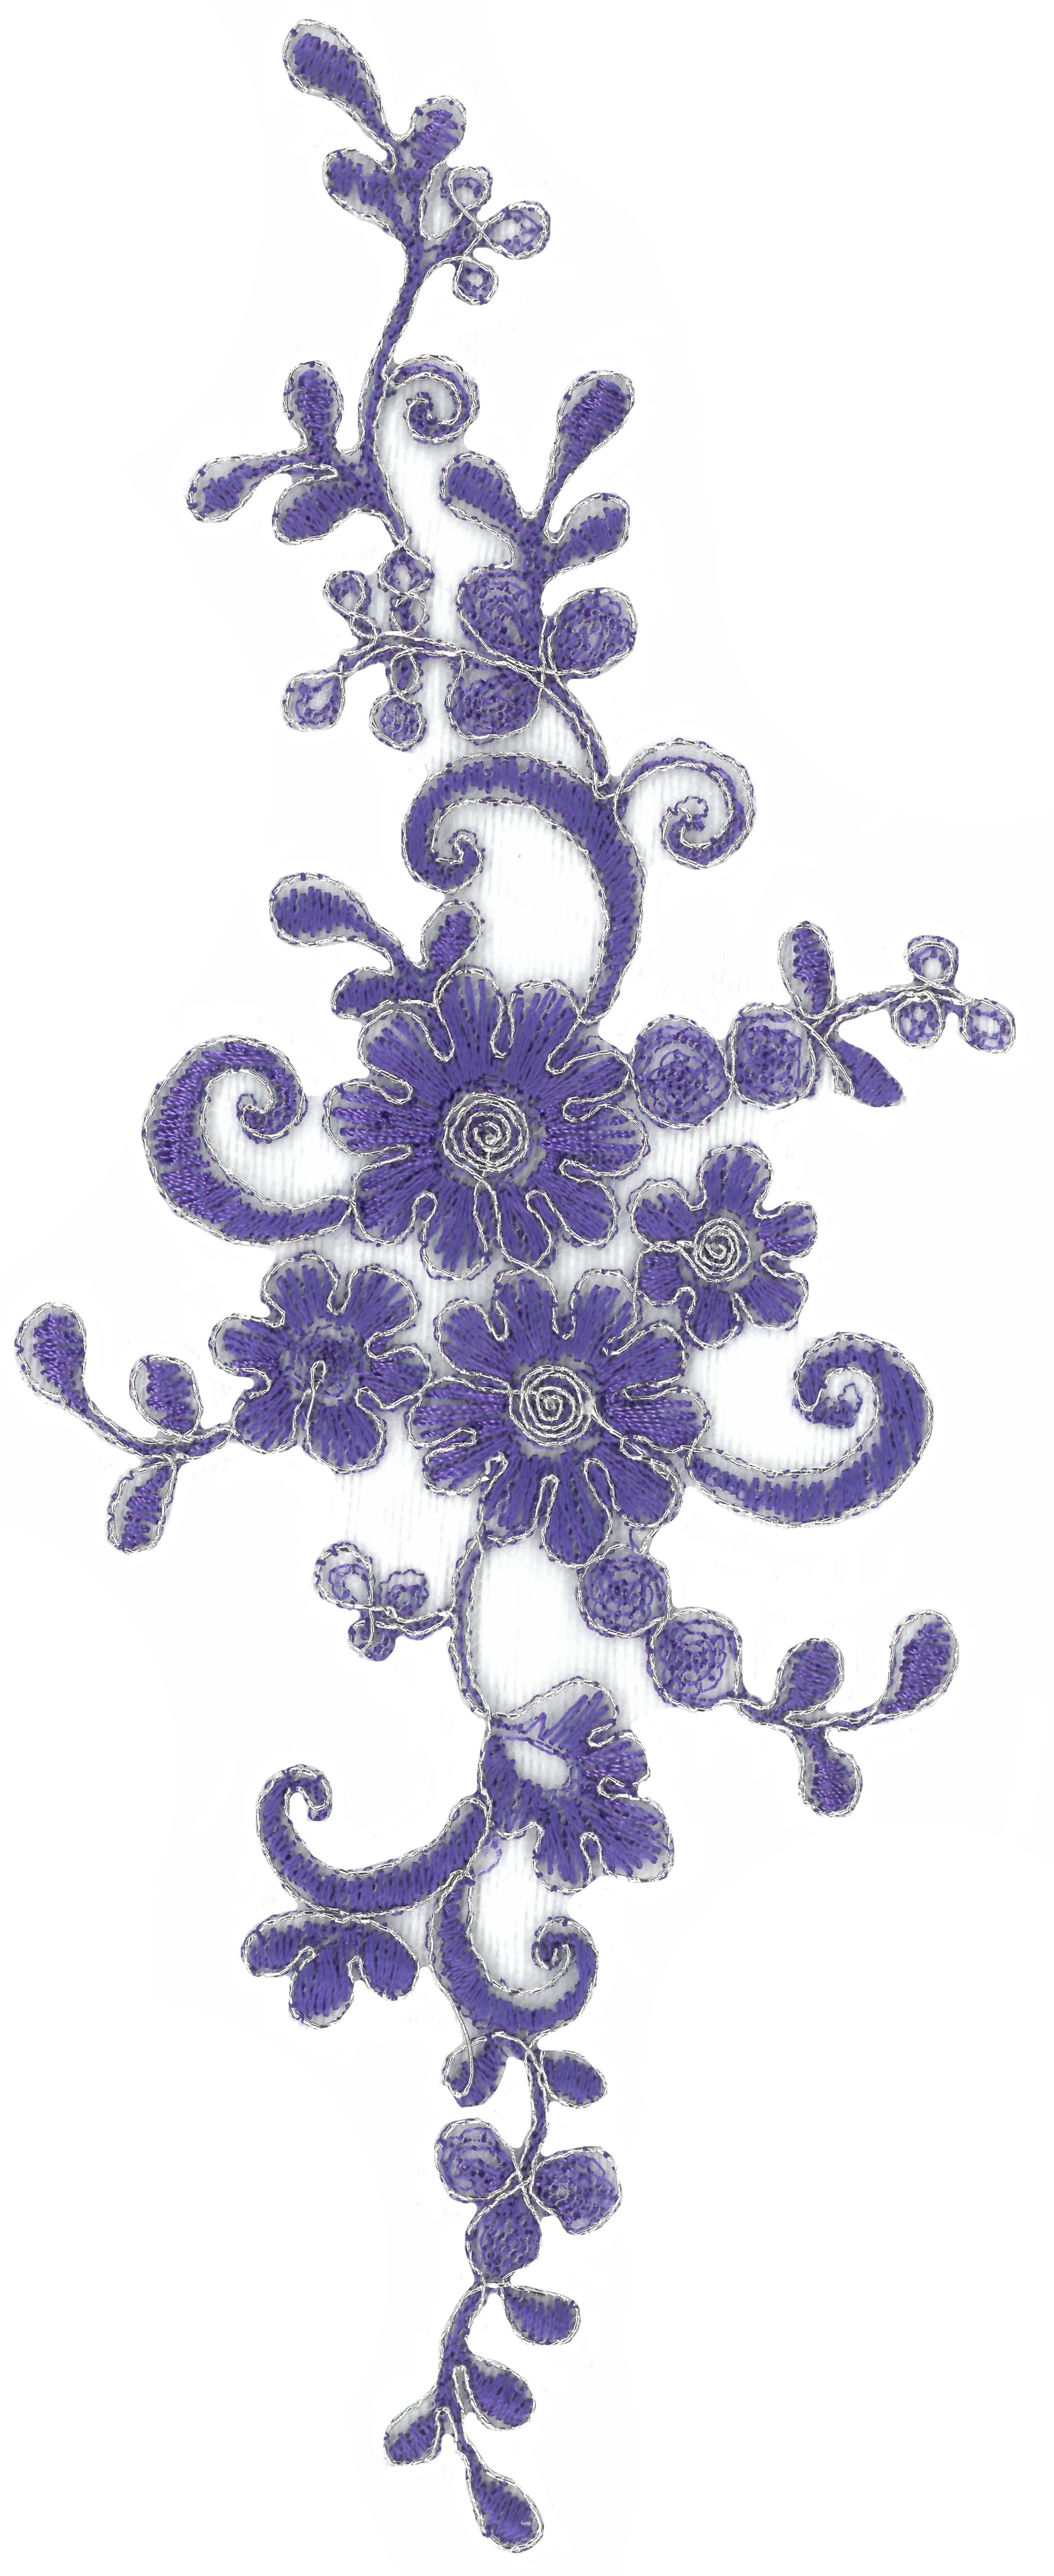 EMBROIDERED MOTIF - PURPLE